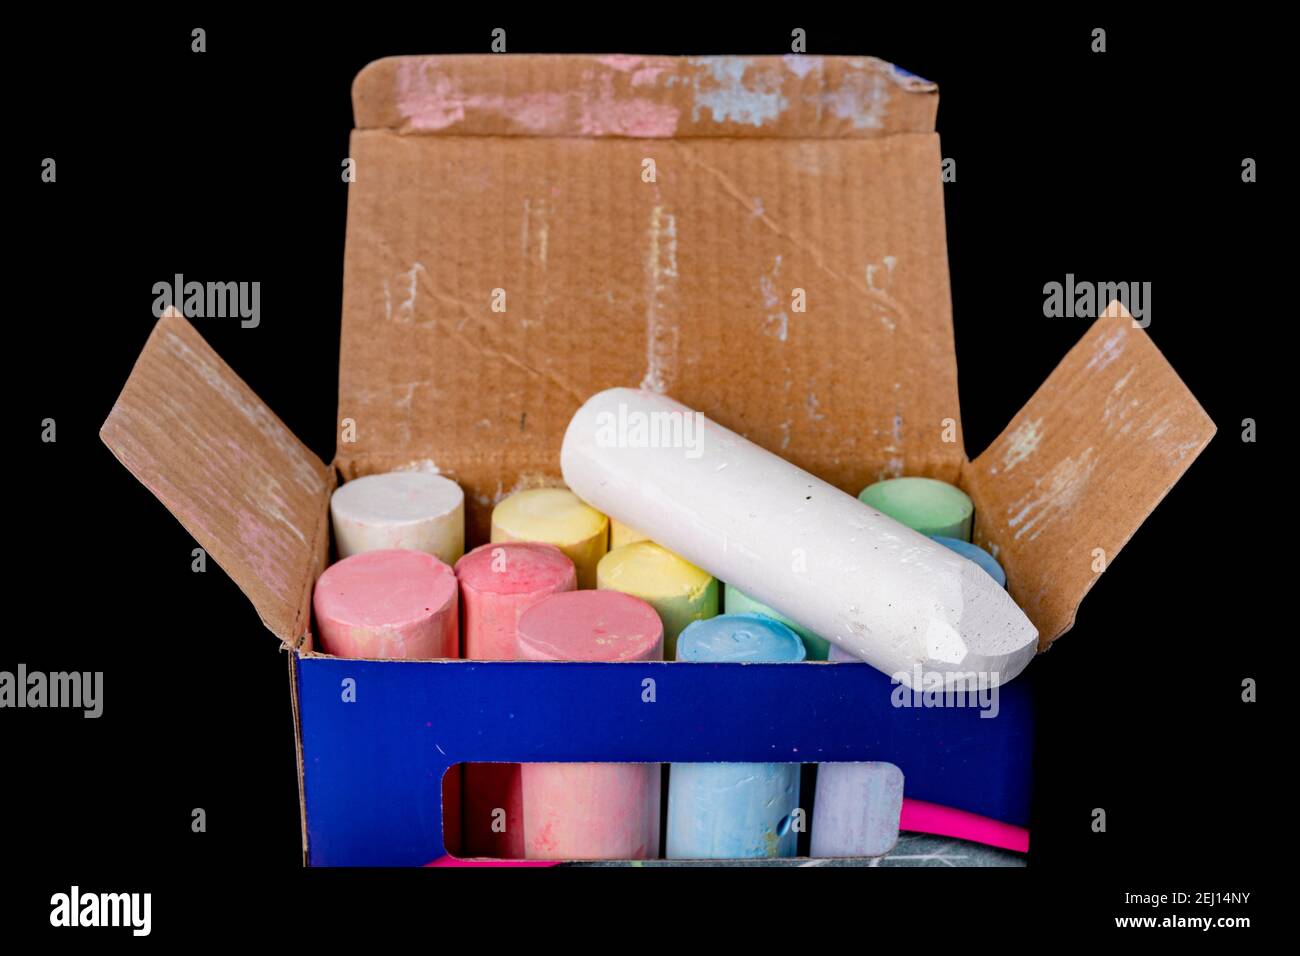 A box of colored chalk for street drawing. School chalk in a cardboard box. Dark background. Stock Photo